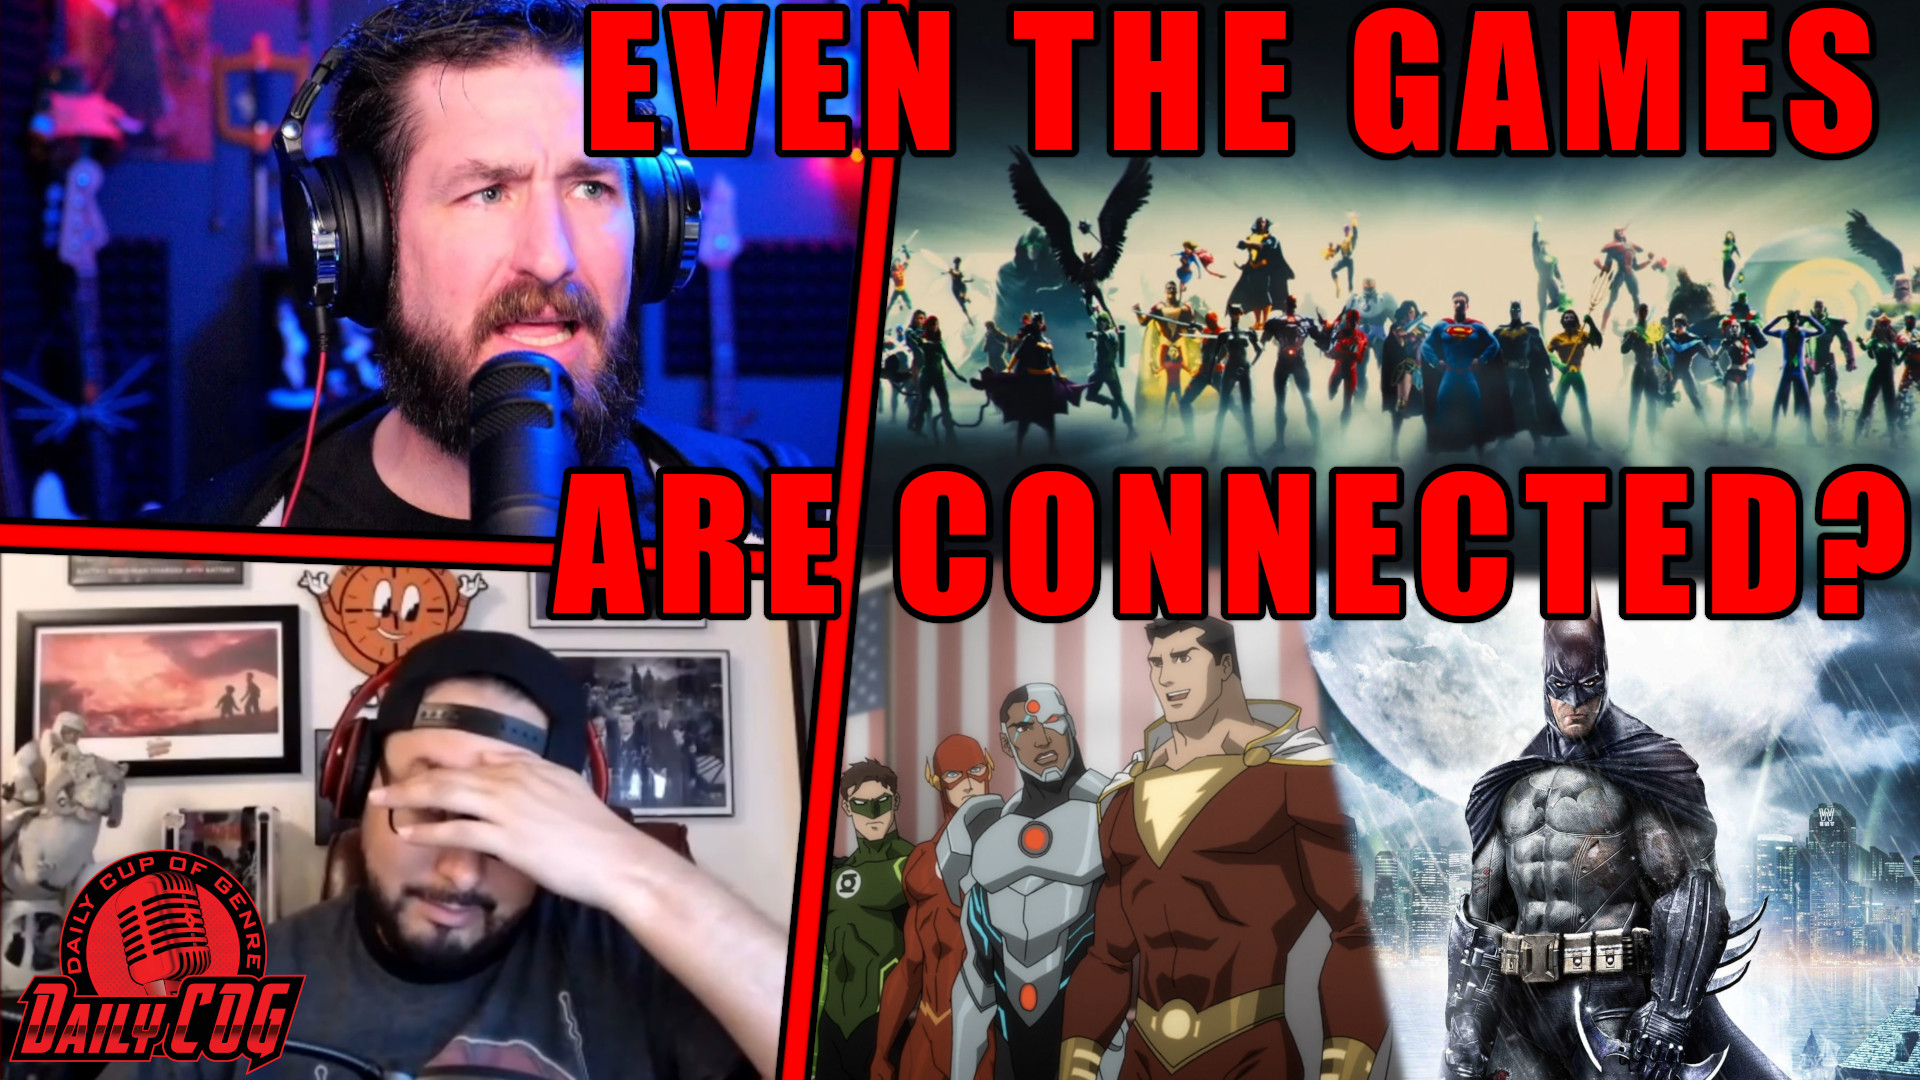 The DCU Is All Connected Including Games: Good Idea Or Bad? | D-COG